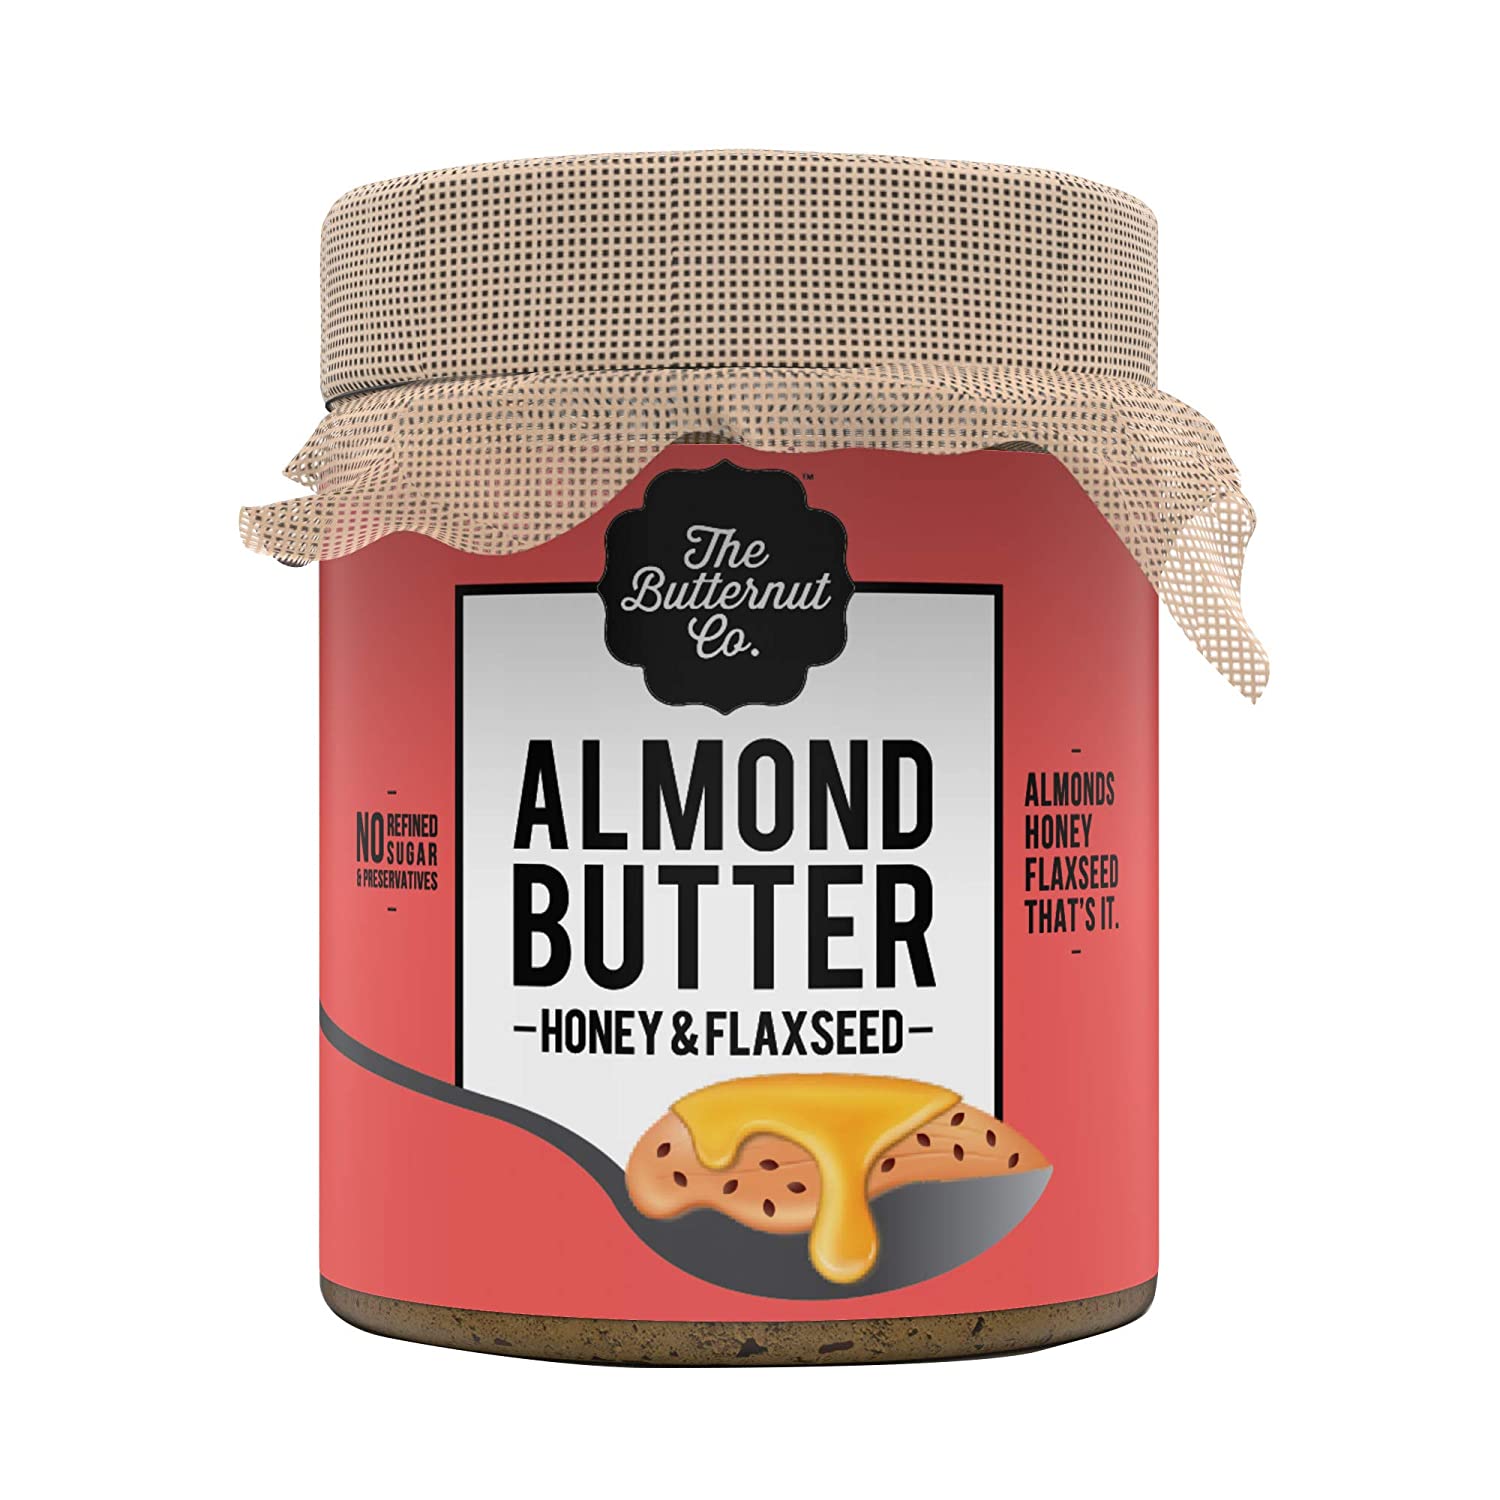 The Butternut Co. Almond Butter Honey & Flaxseed 200 gms